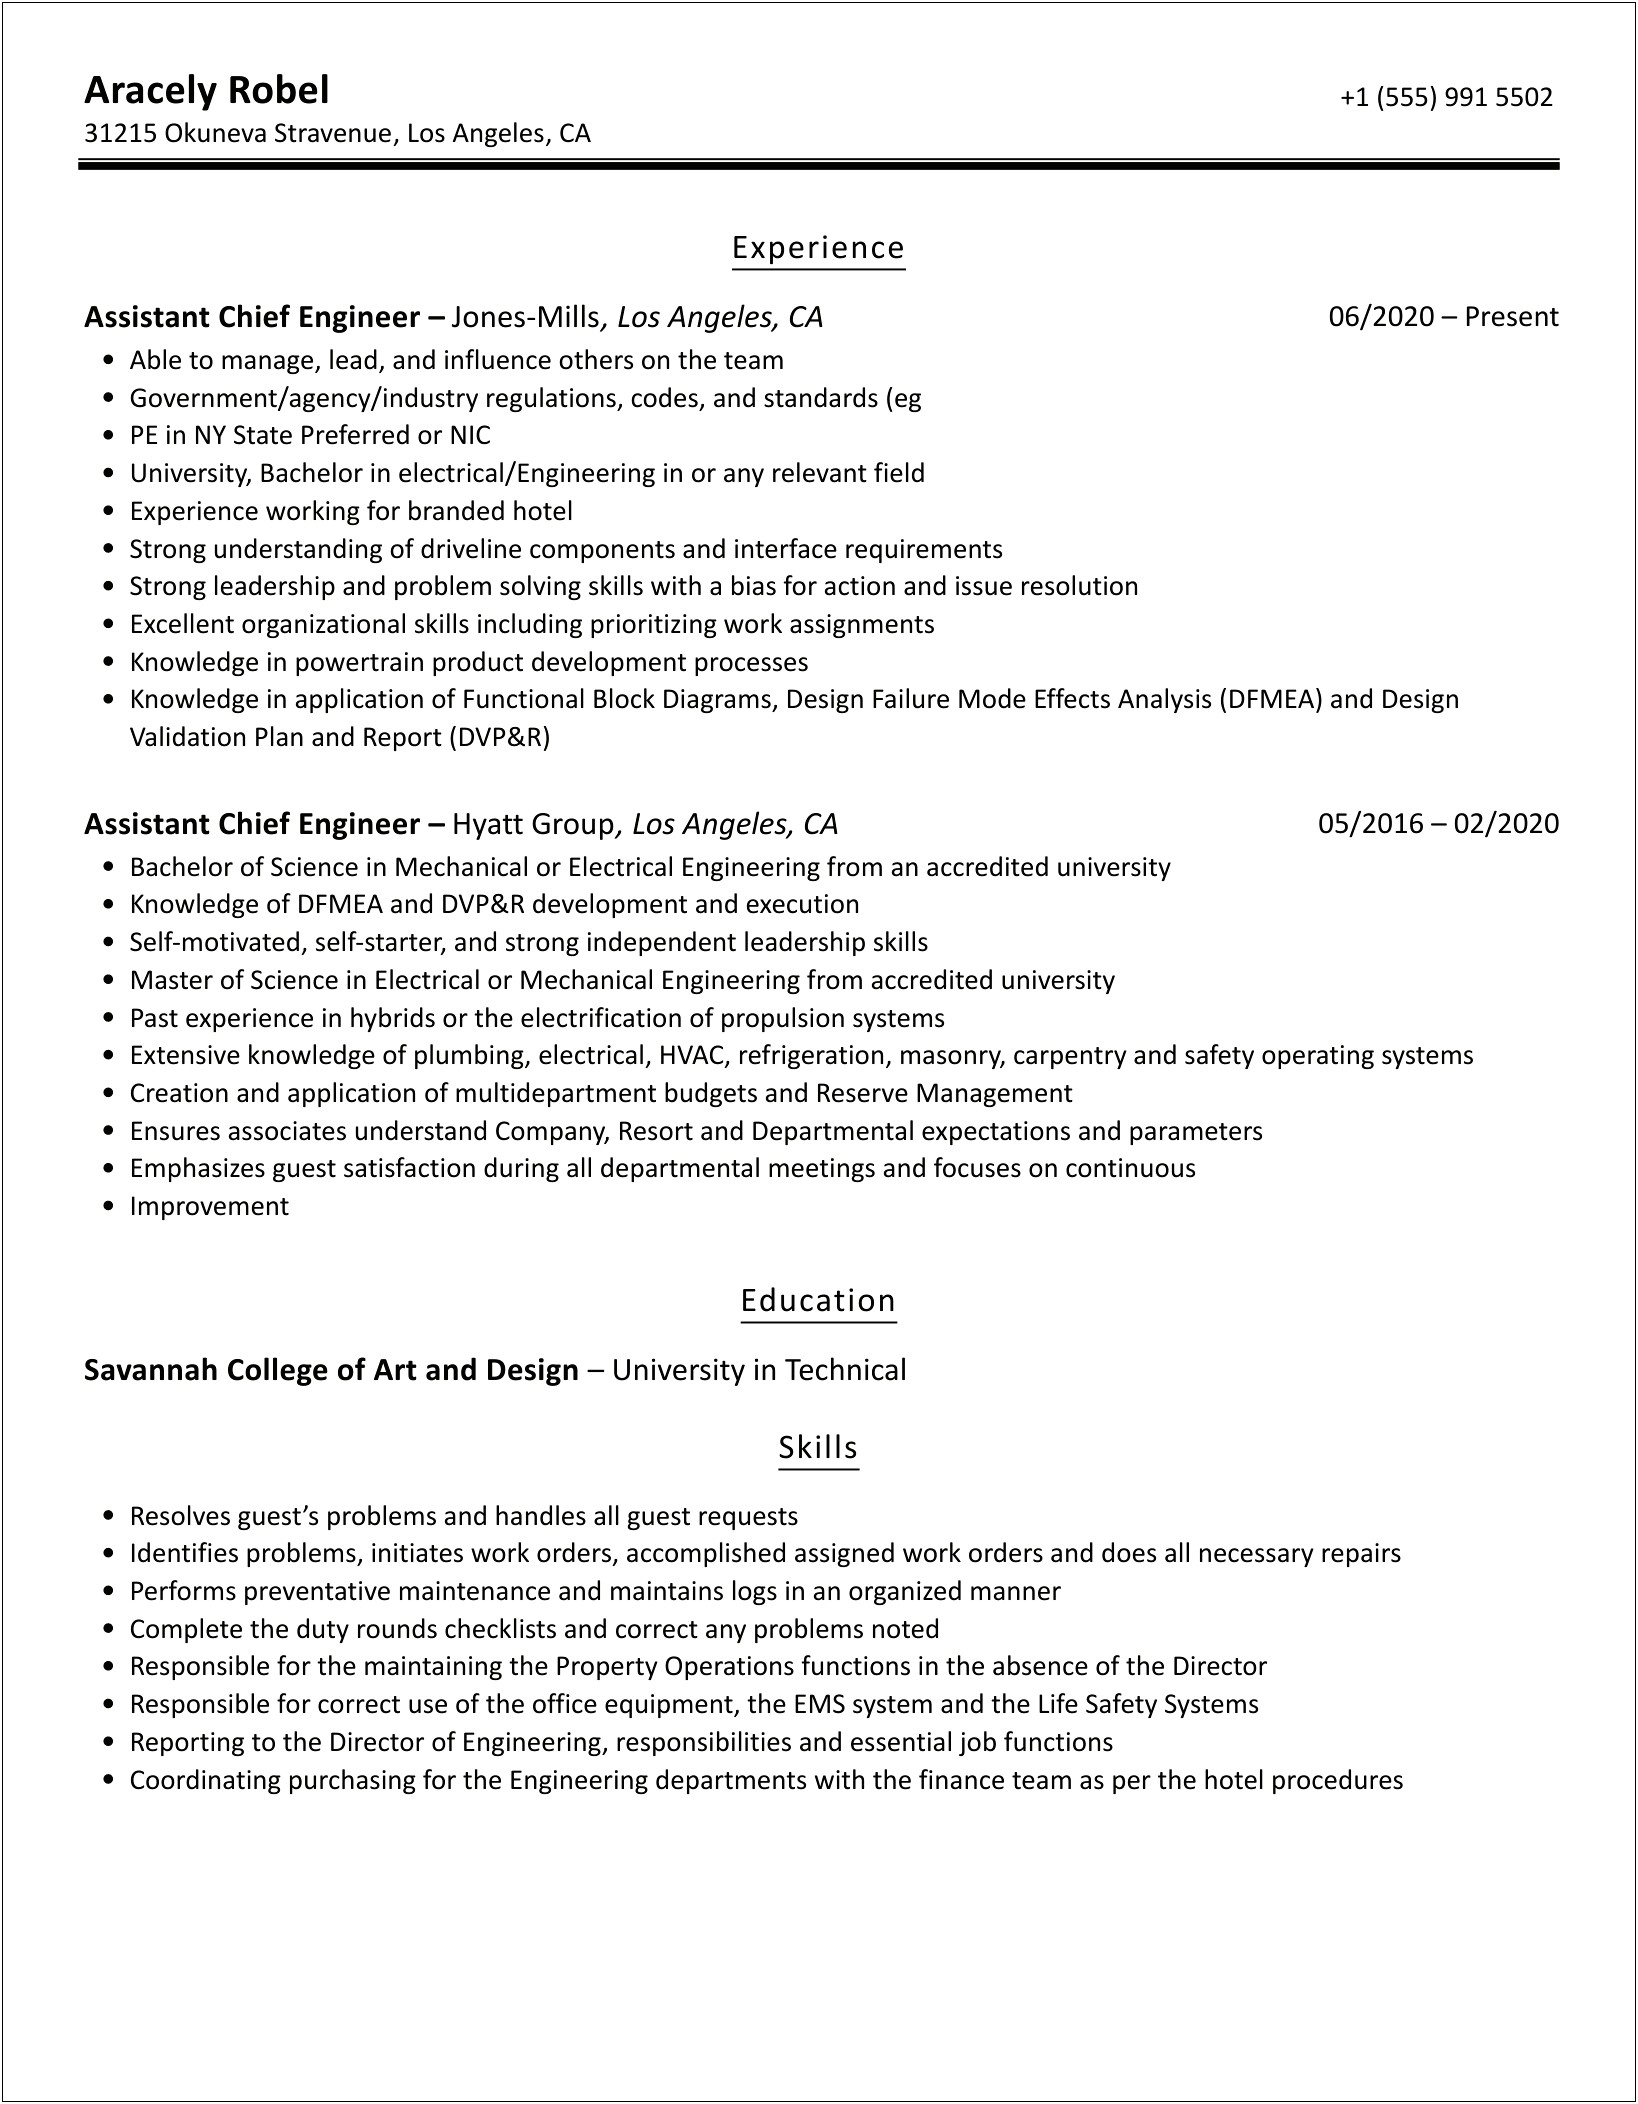 Resume Template For Assistant Chief Enginerer